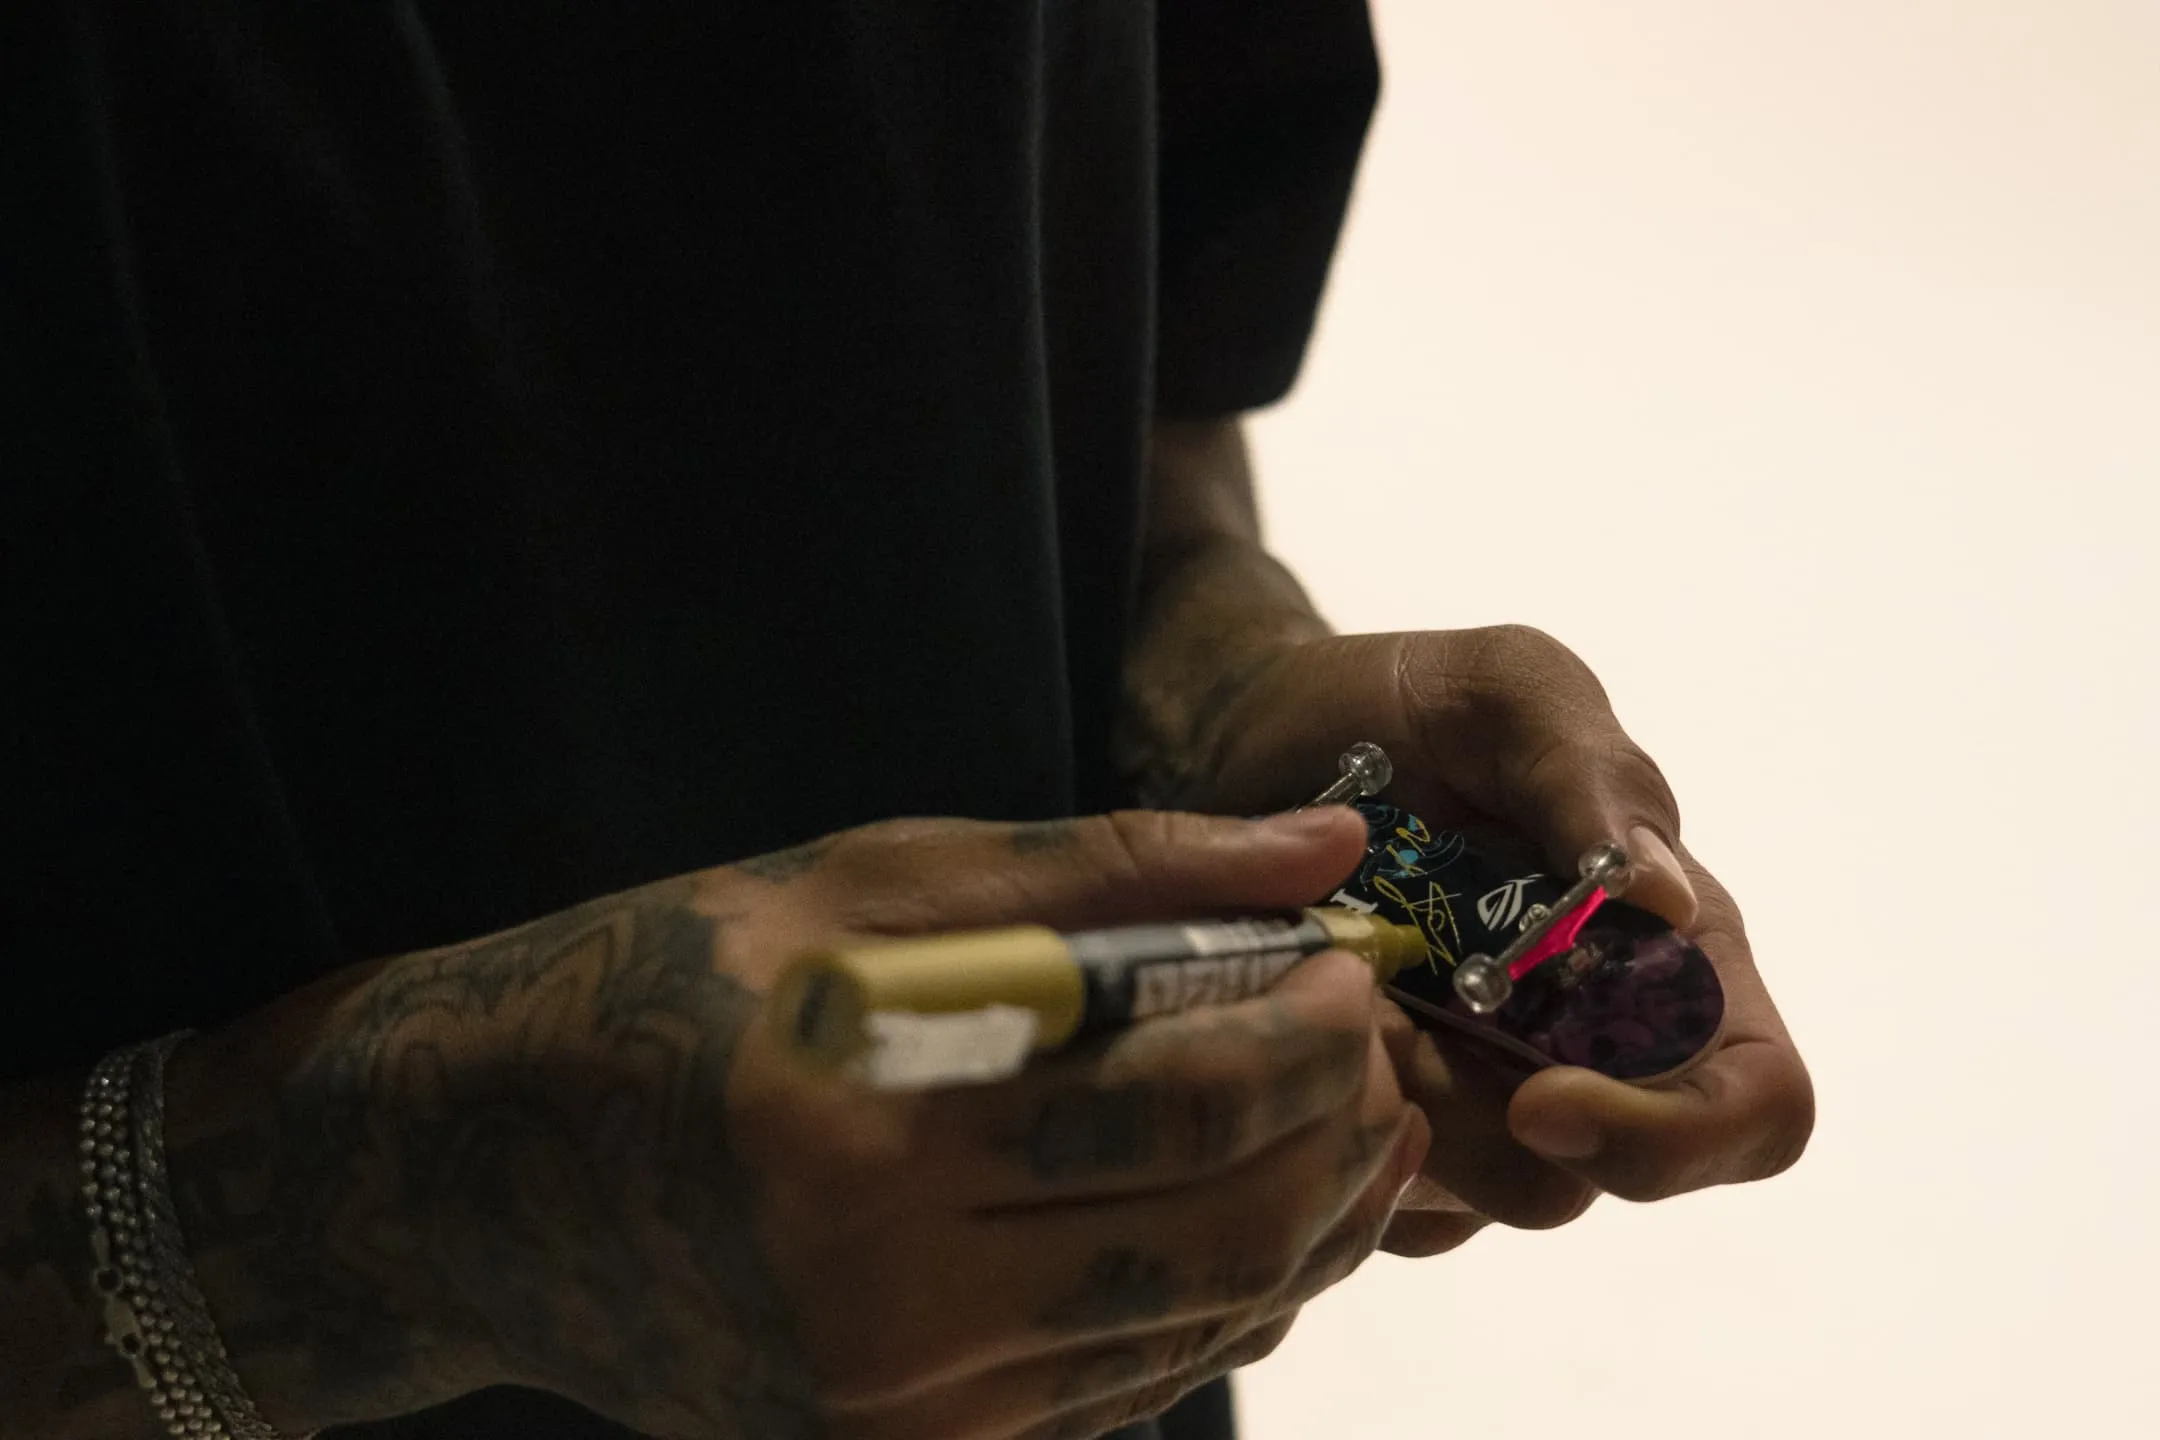 A close up of NYJAH HUSTON signing on a Finger Skate Board toy.